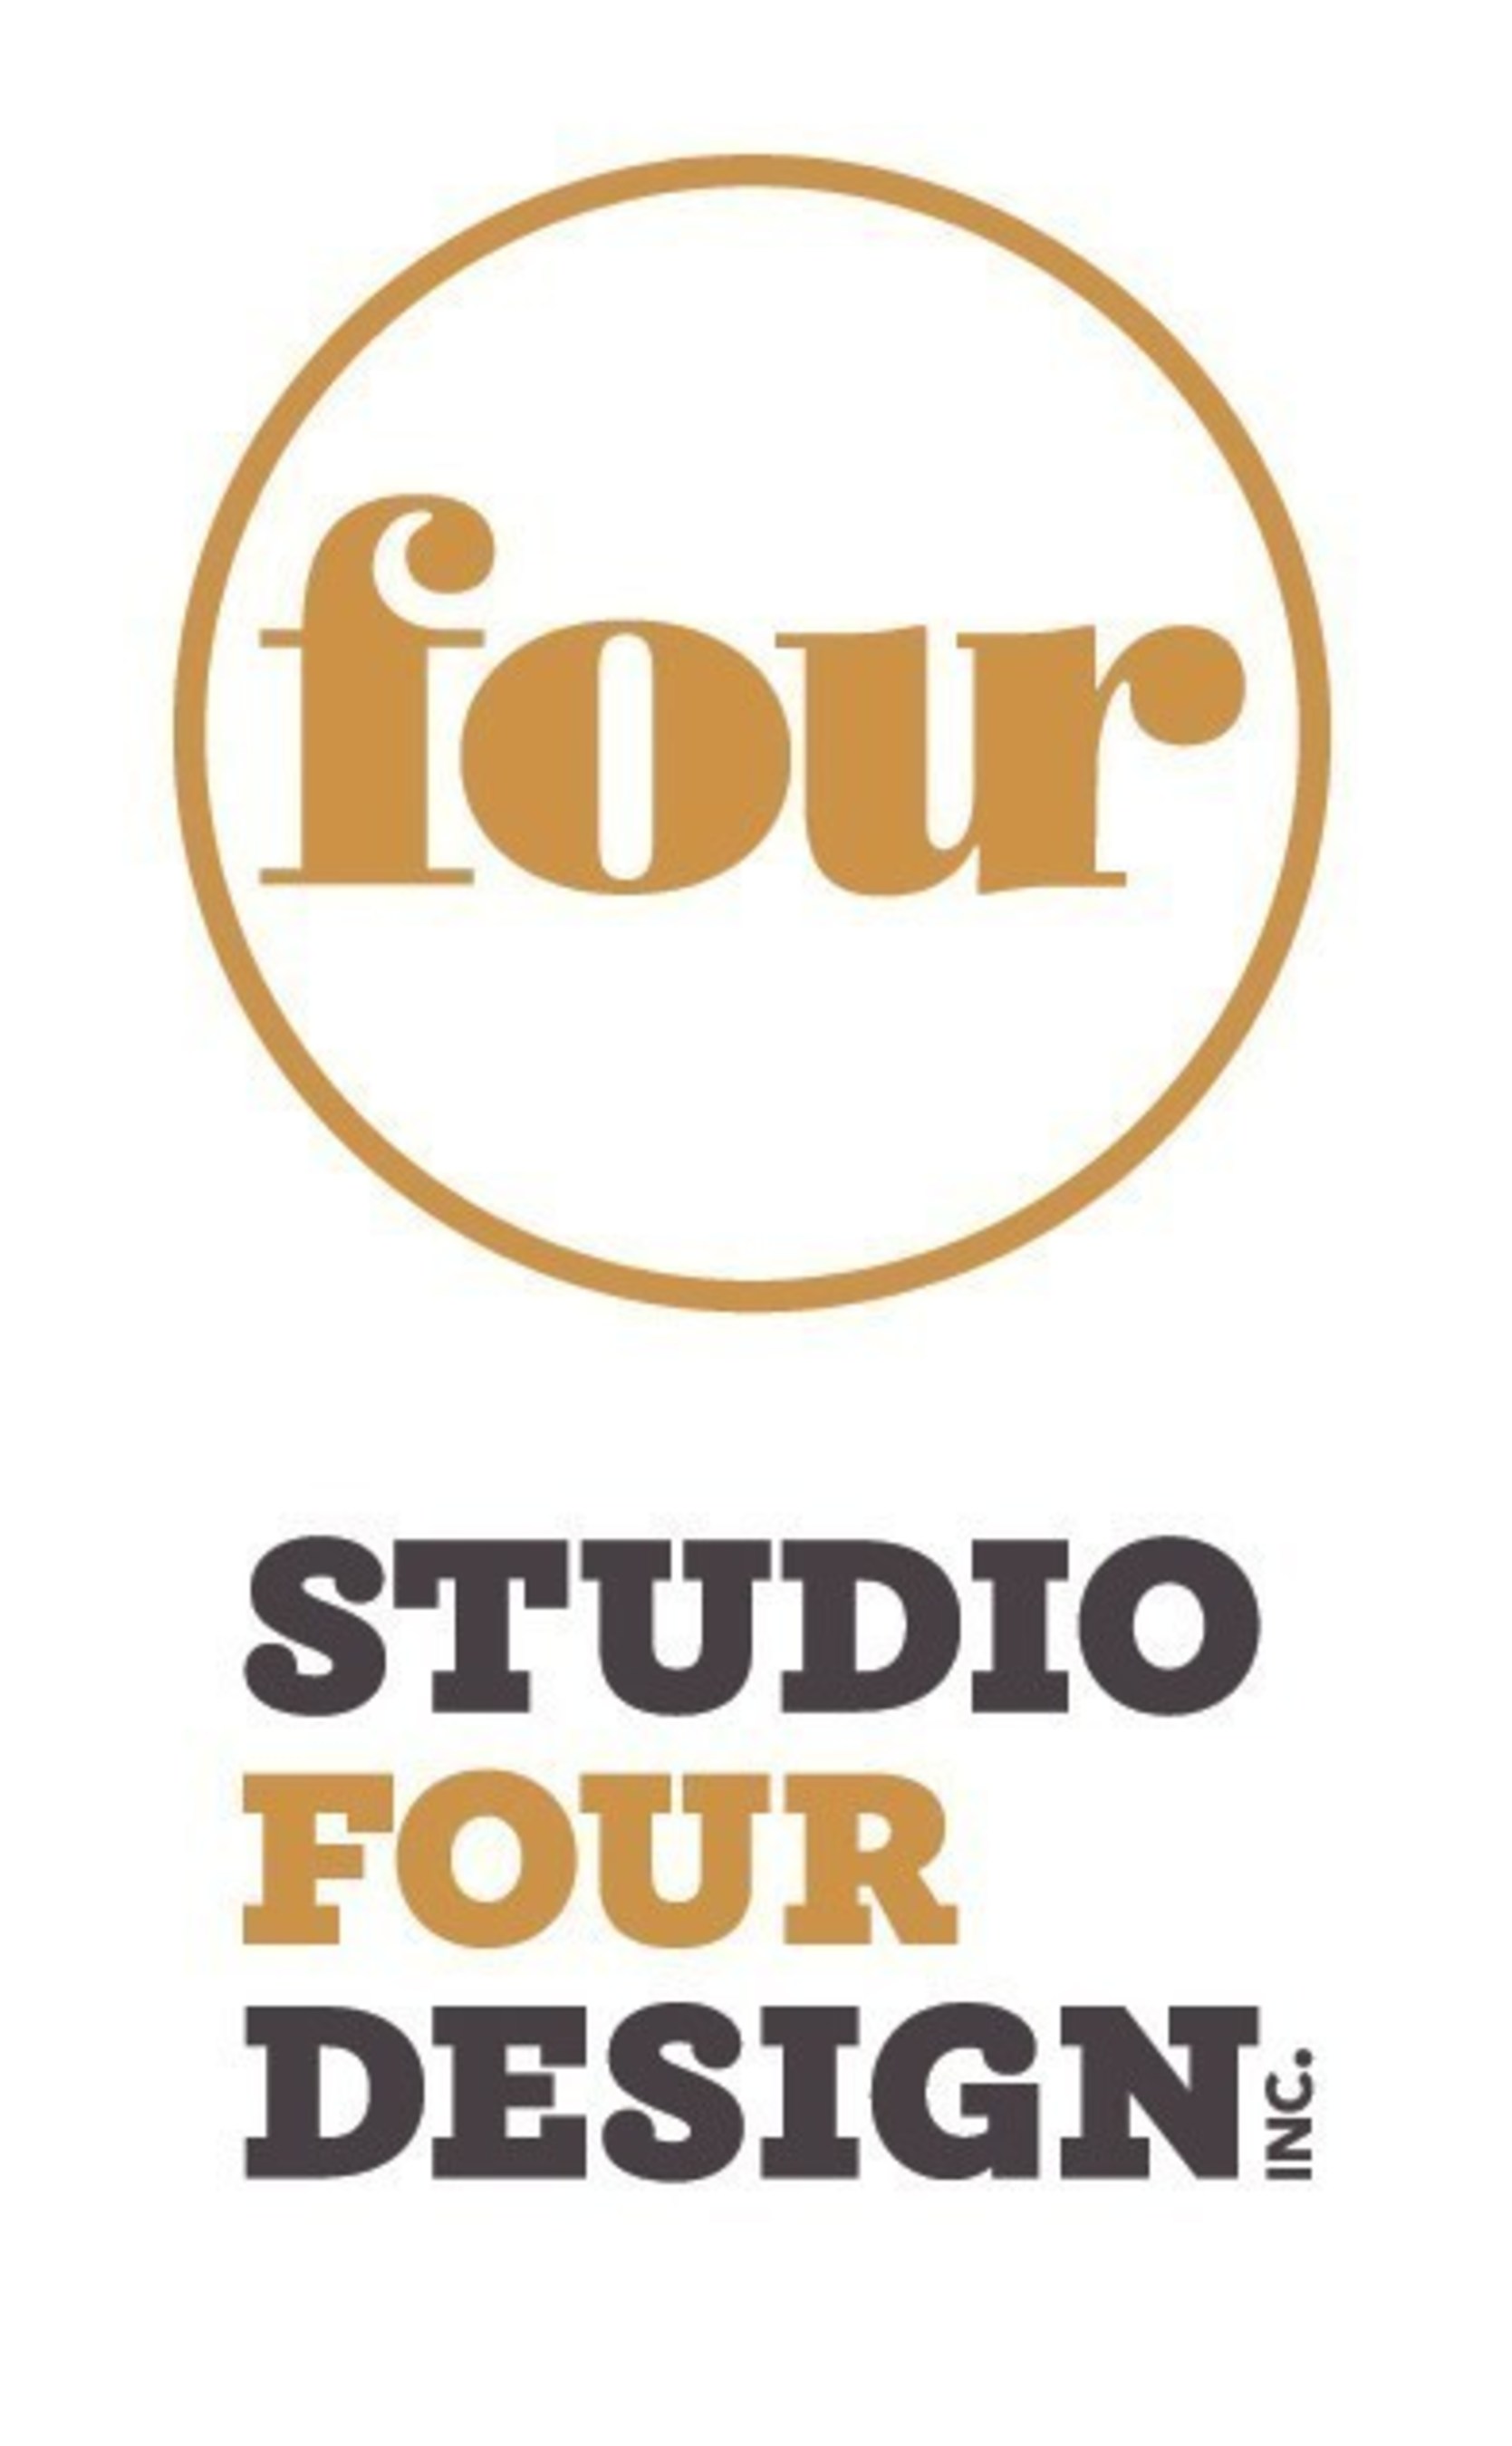 Currently registered in 22 states, Knoxville-based architectural and interior design firm Studio Four Design debuts on the 2016 Inc. 5000 list as one of fastest growing companies in America.